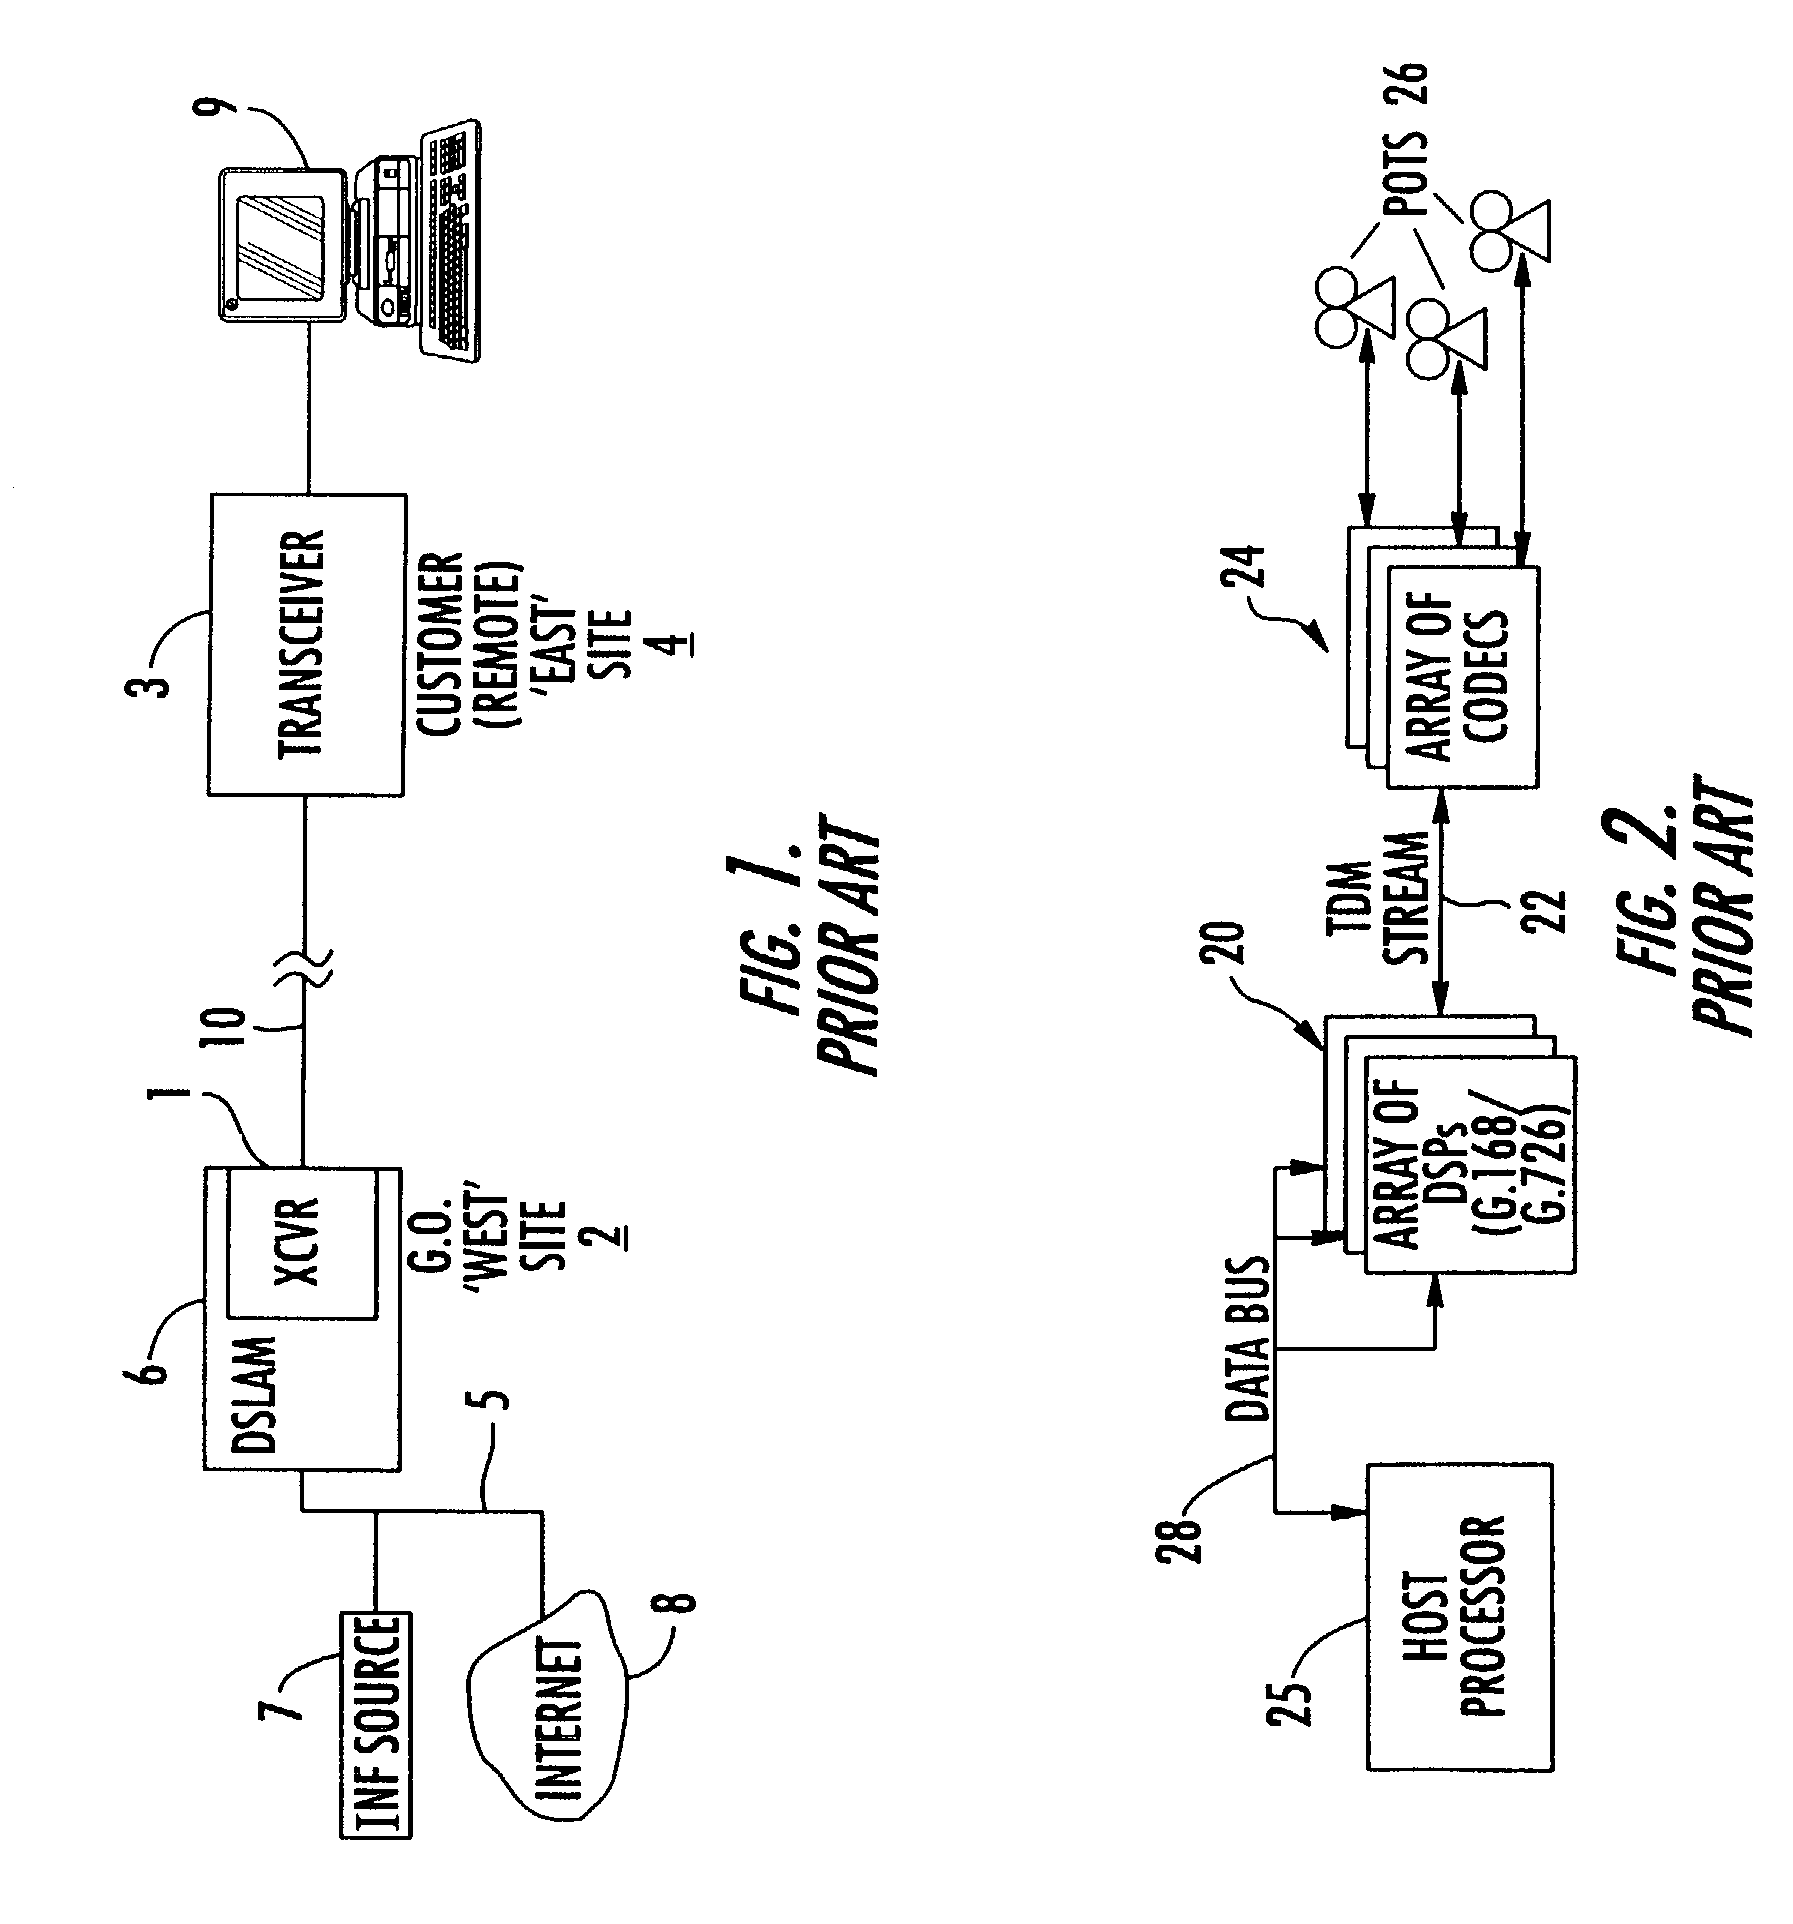 Echo canceller and compression operators cascaded in time division multiplex voice communication path of integrated access device for decreasing latency and processor overhead